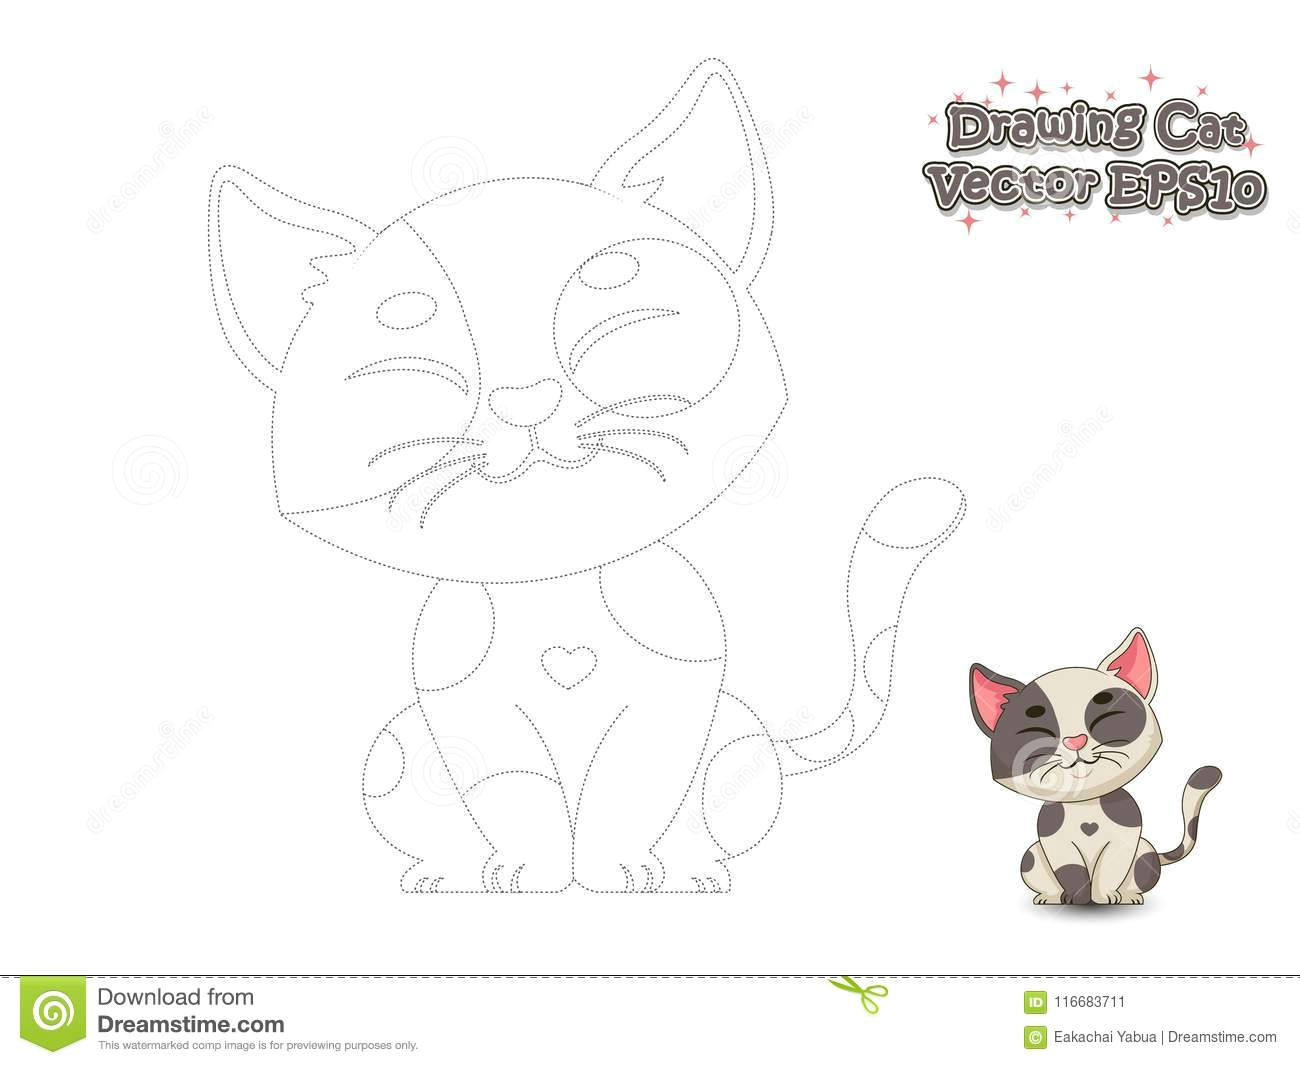 Children S Drawing Of A Cat Drawing and Paint Cute Cartoon Cat Educational Game for Kids V